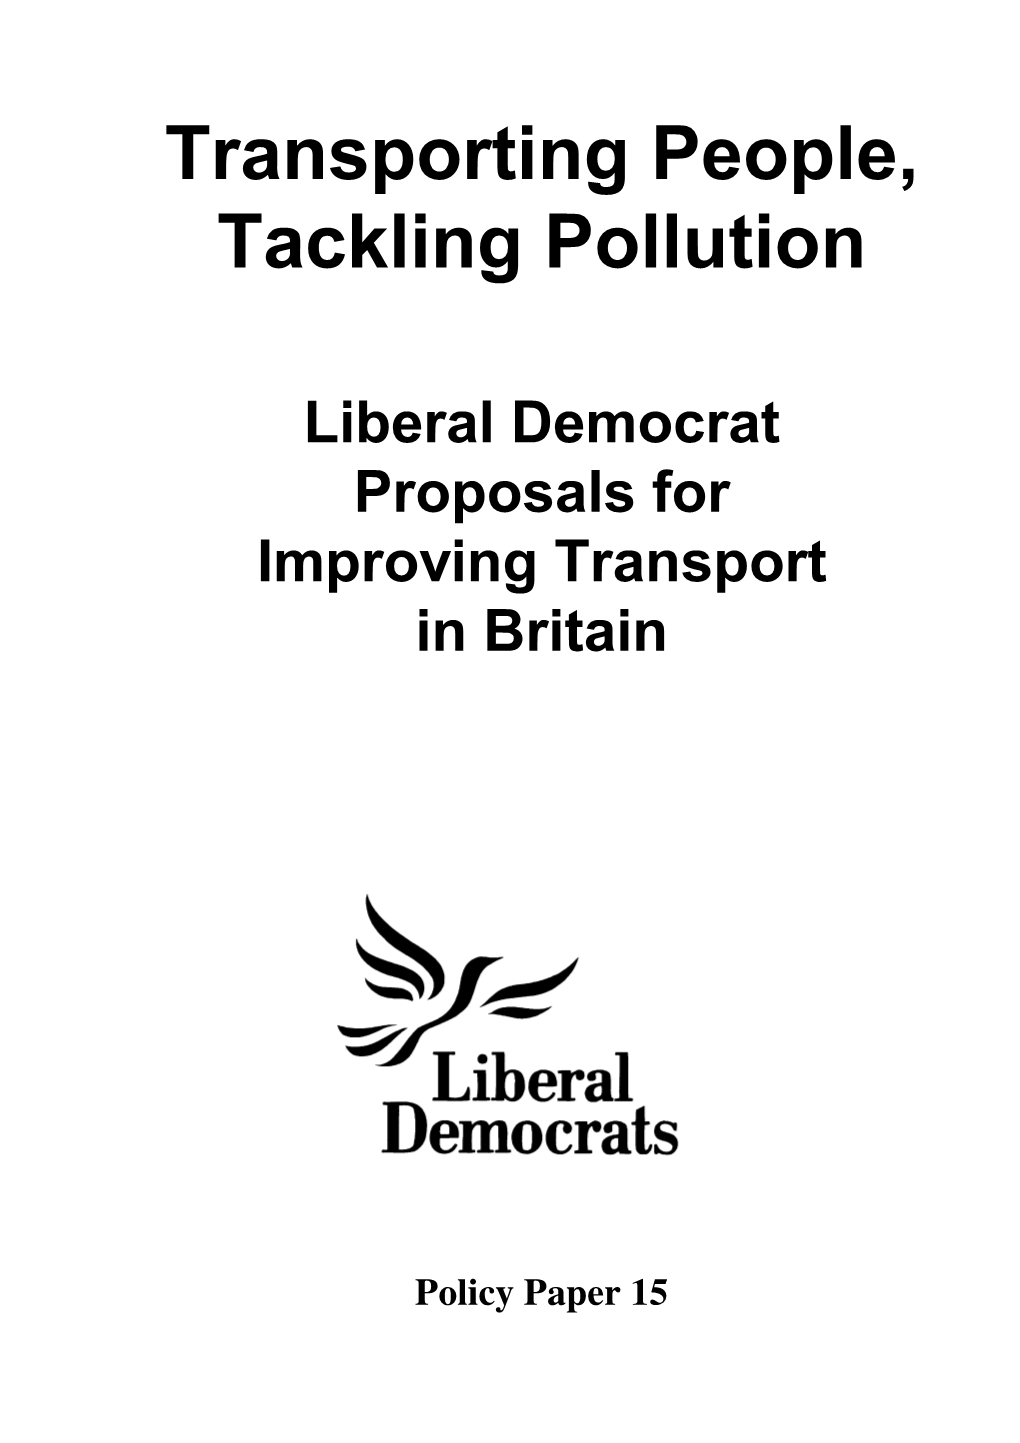 15. Transporting People, Tackling Pollution